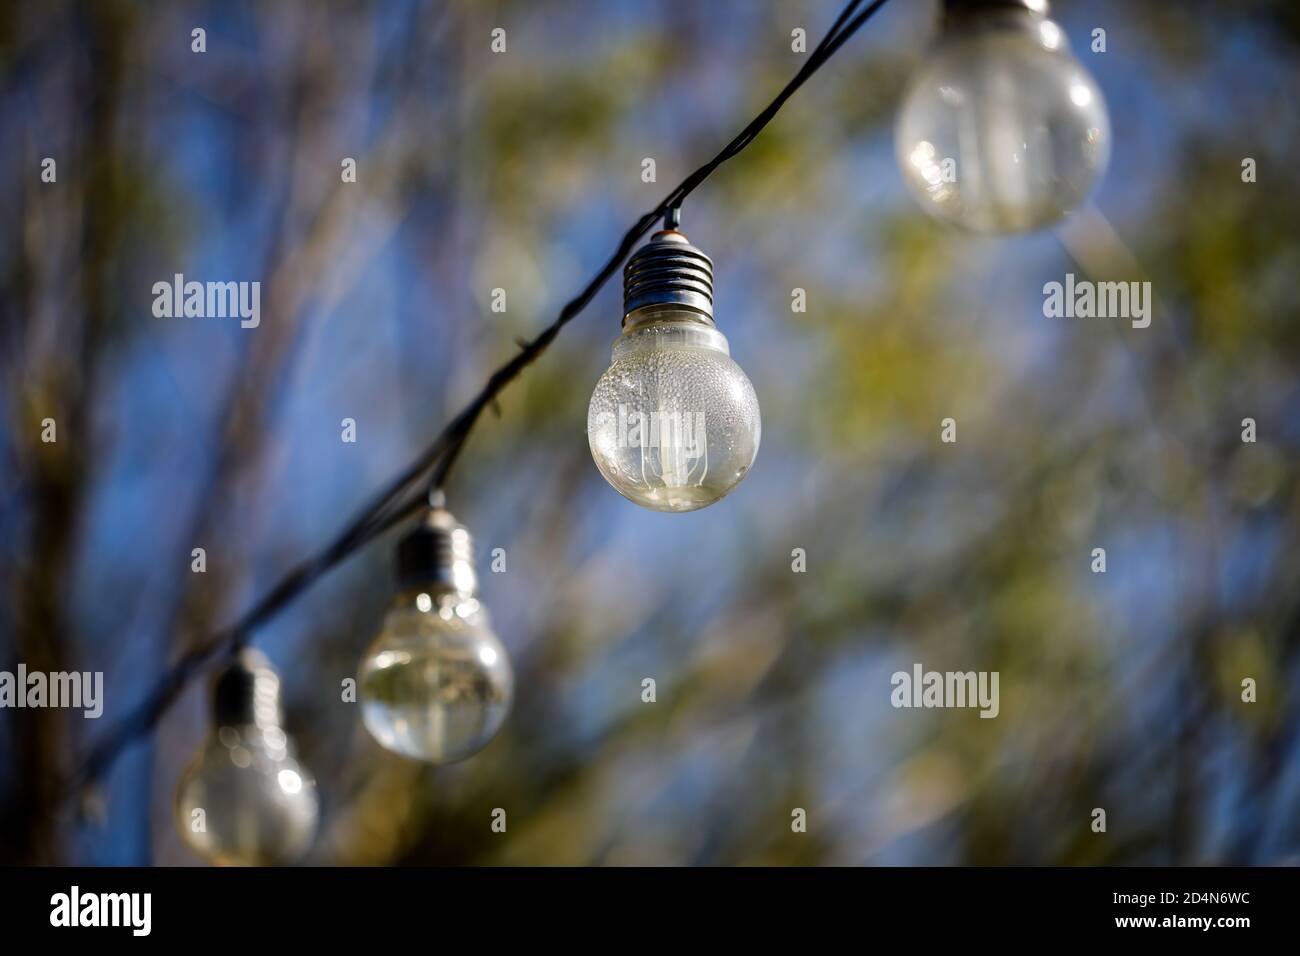 Details with drops of condensation water inside a solar light bulb Stock Photo